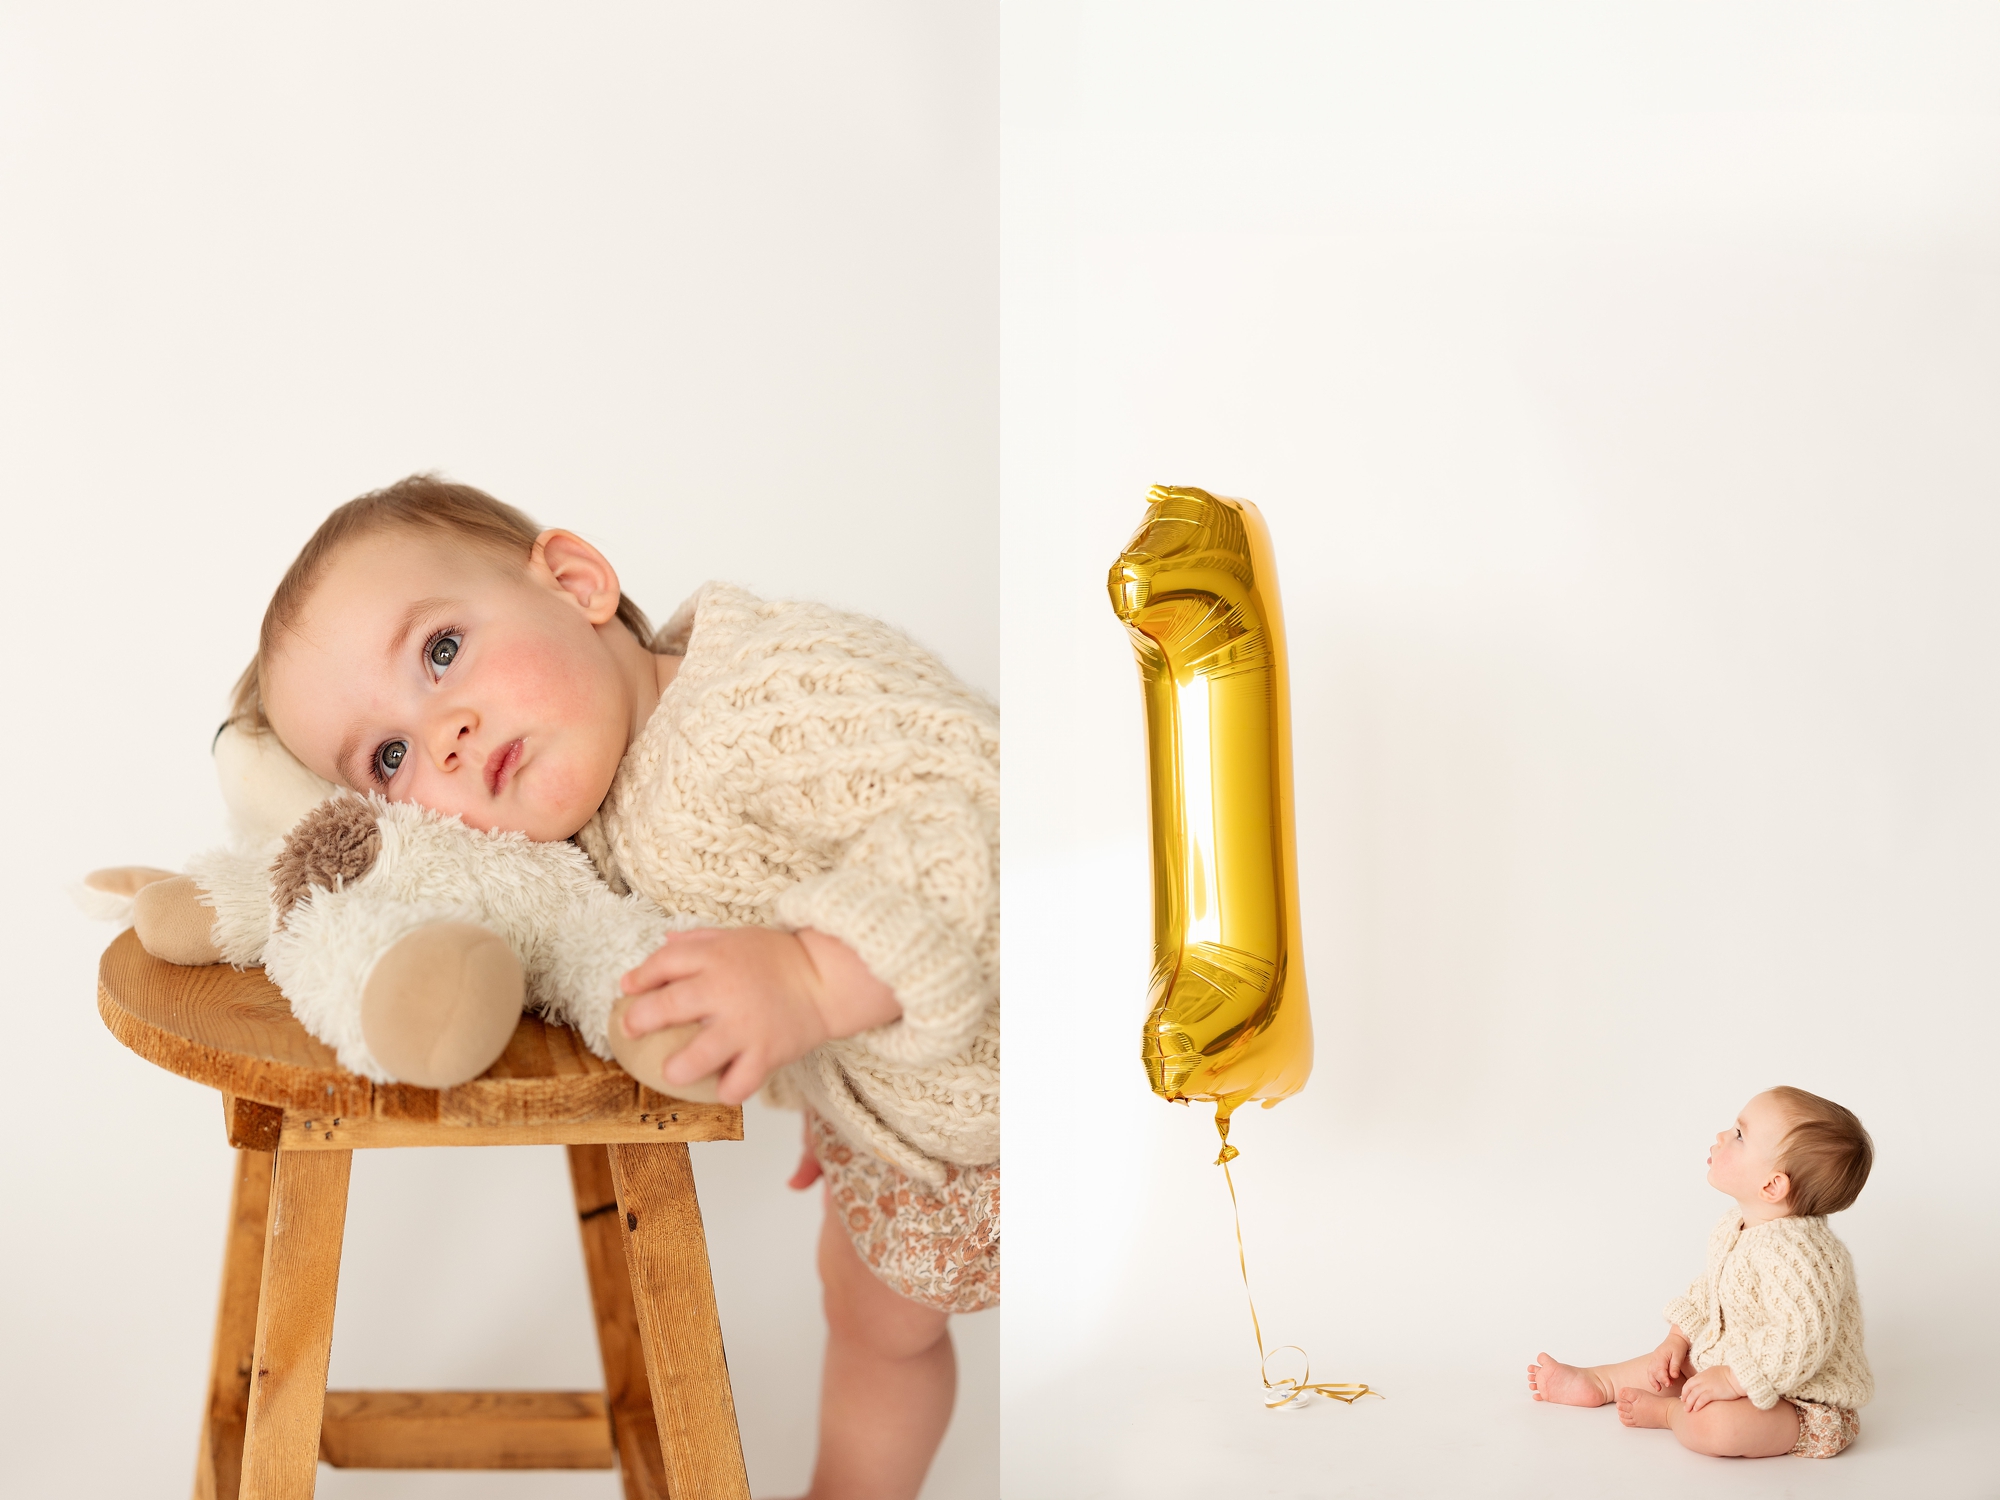 studio photos in Colorado Springs at kindle studio of a baby girl on her first birthday with a number one balloon